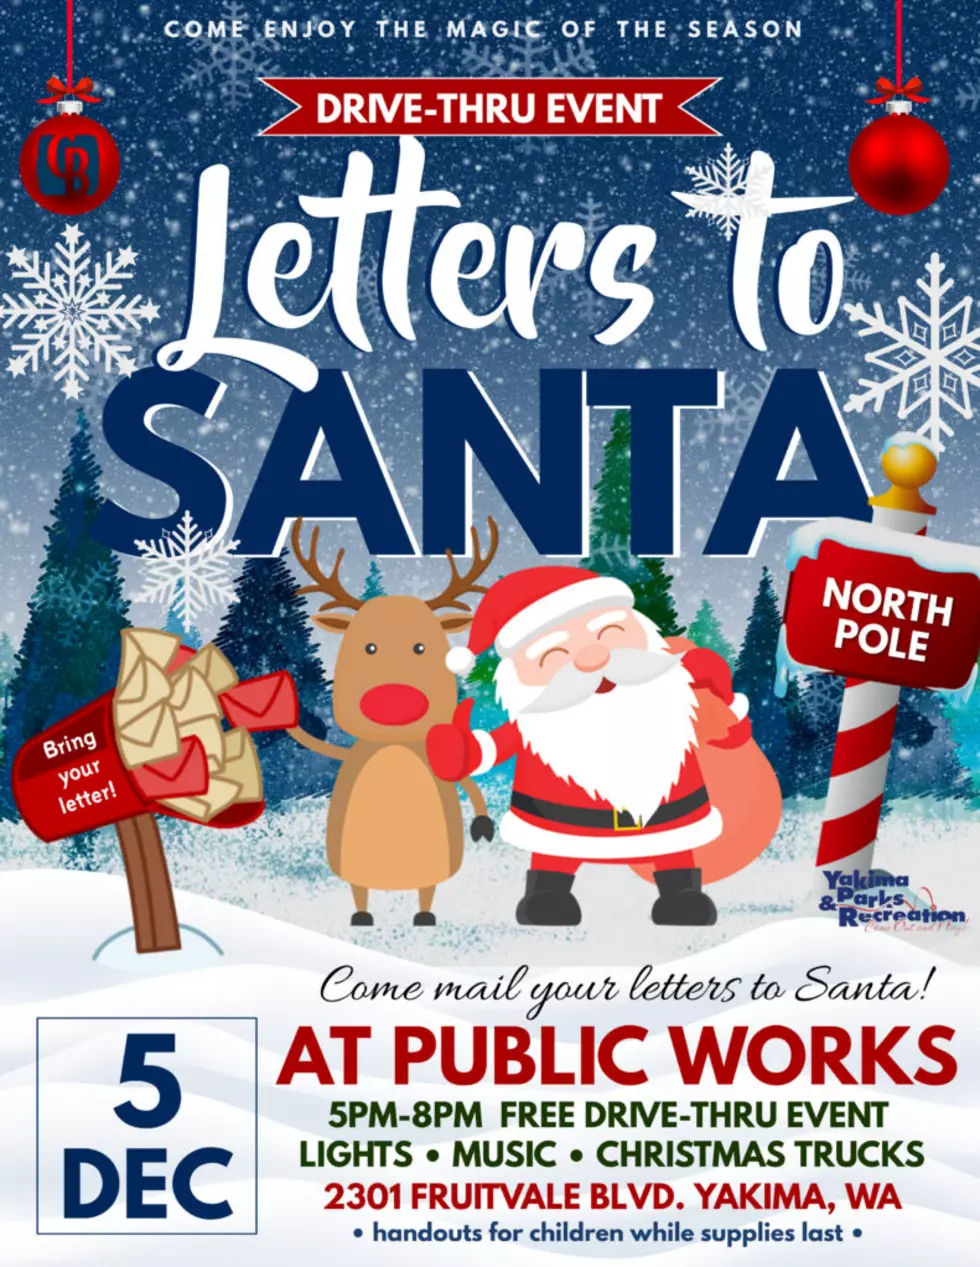 Drive-Thru ‘Letters to Santa’ Event in Yakima This Weekend